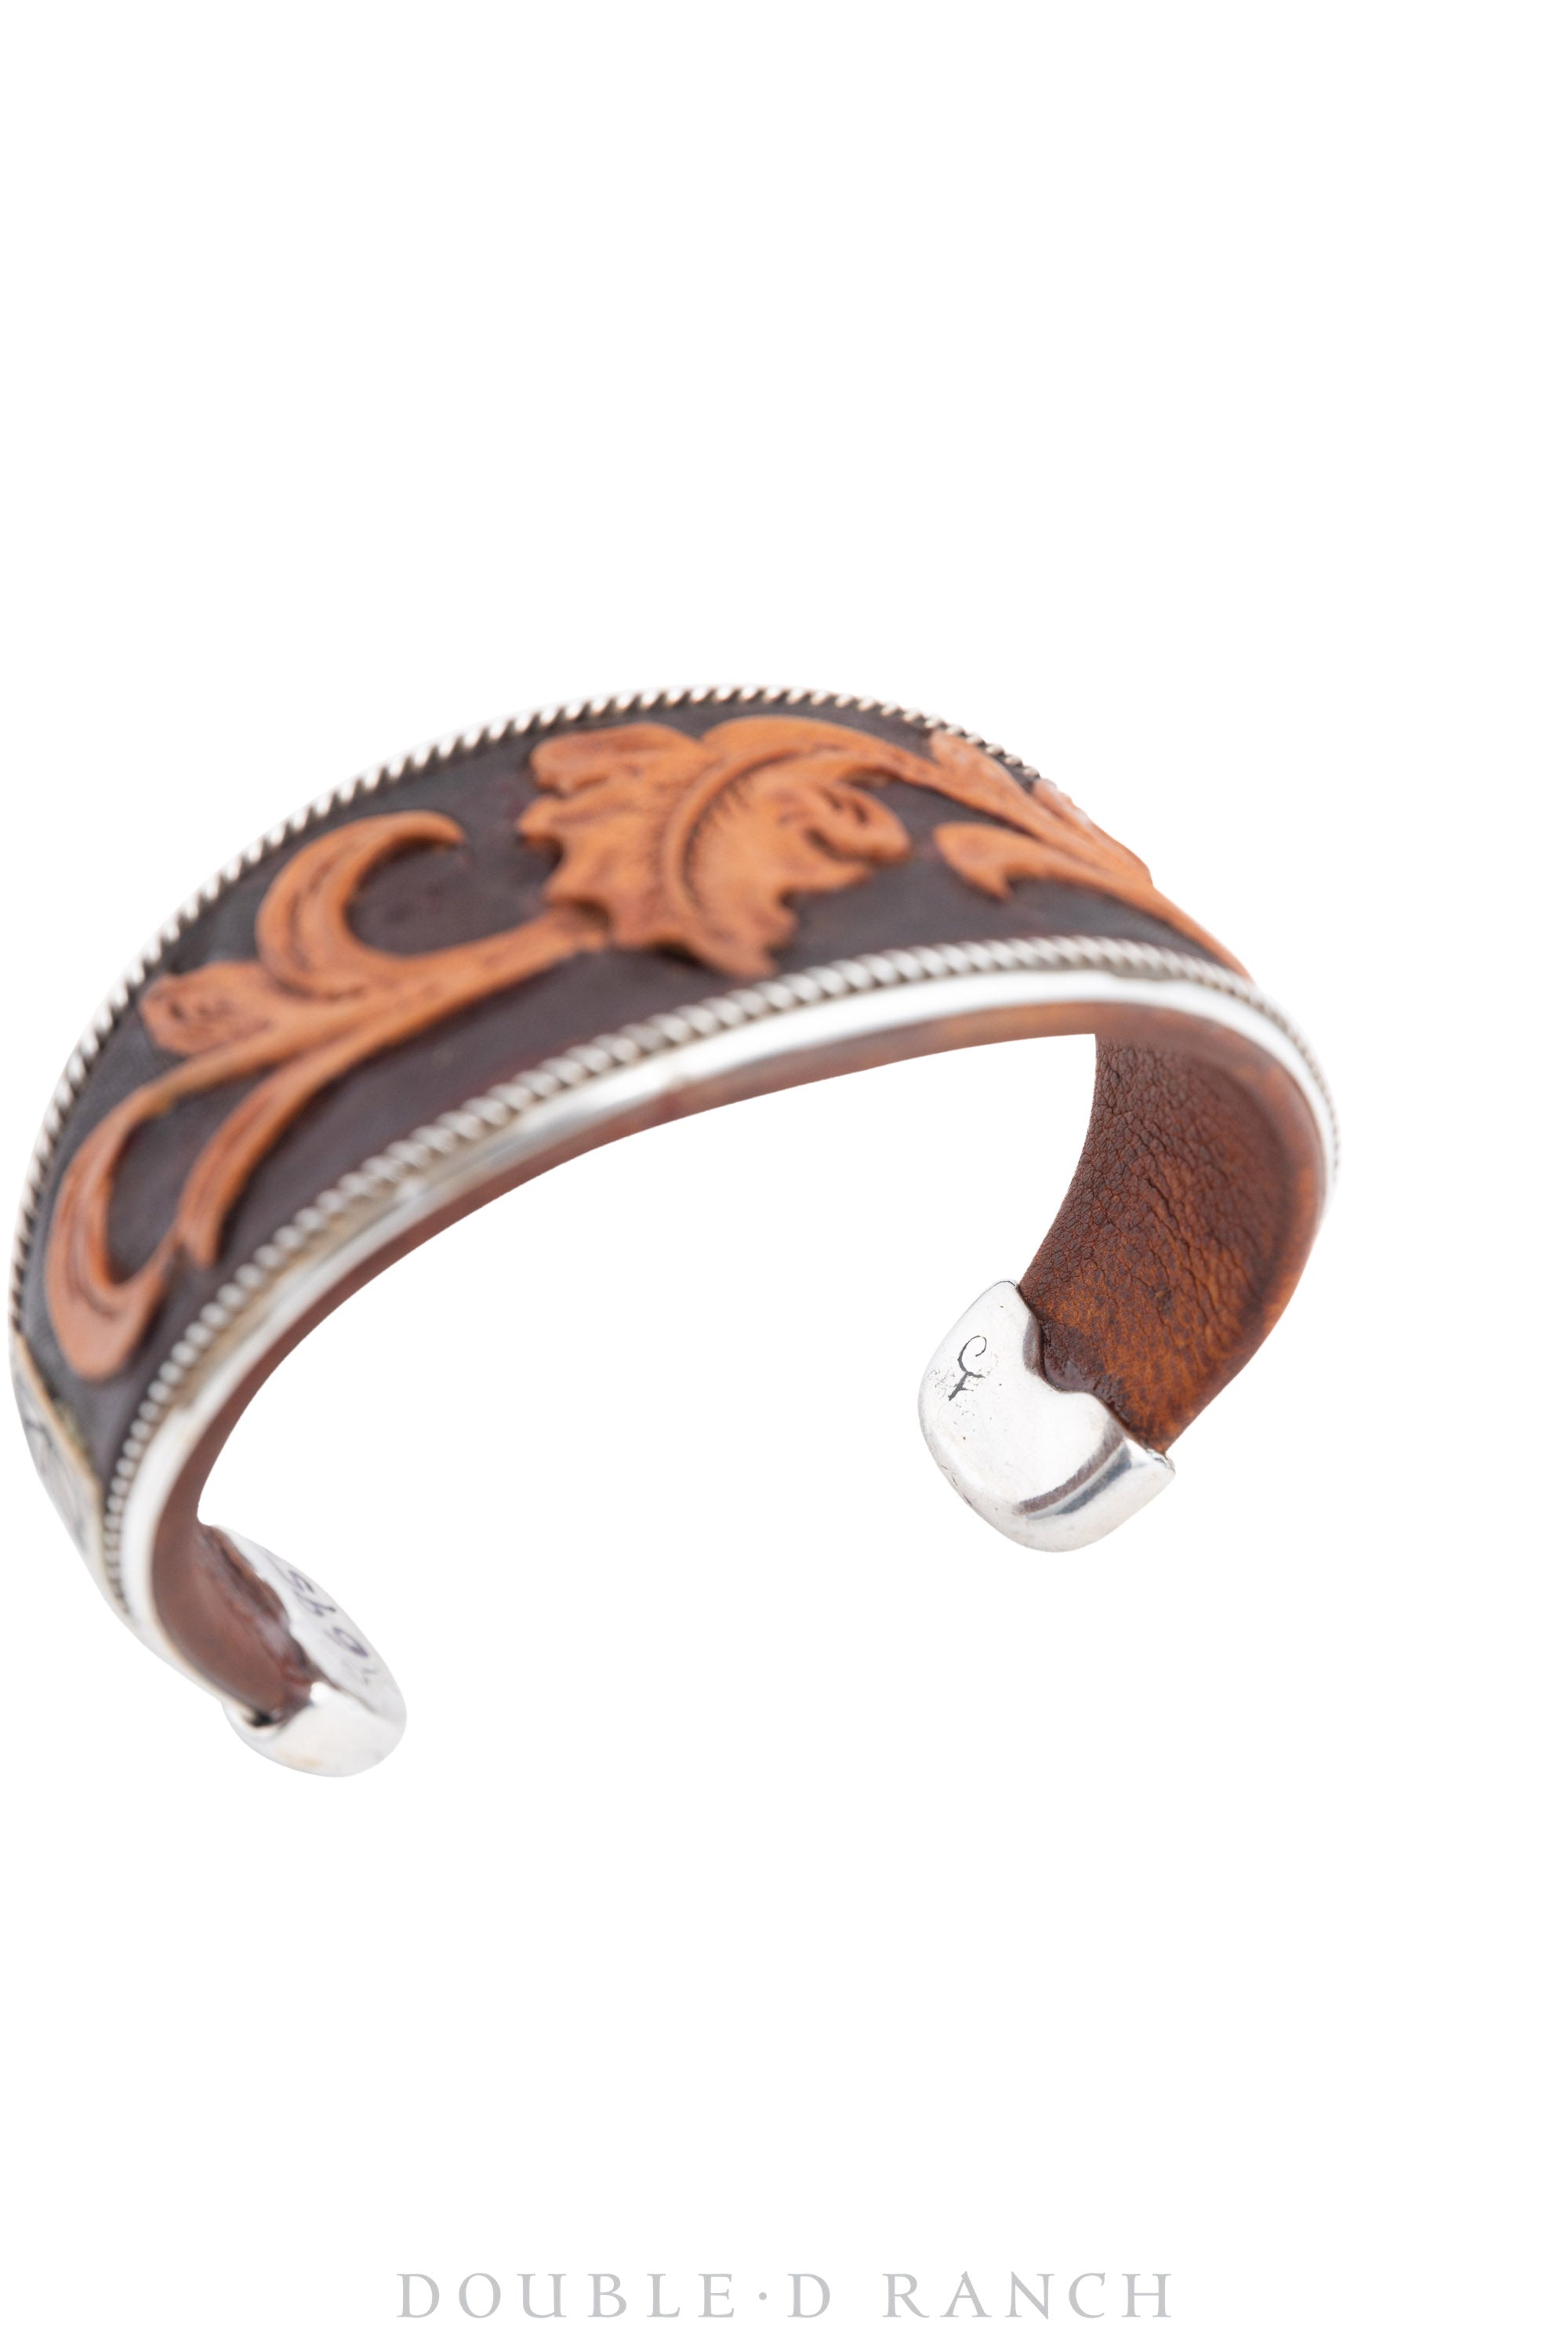 Cuff, Leather, Tooled Leather, Artisan, Charlie Favour Hallmark, Contemporary, 3586